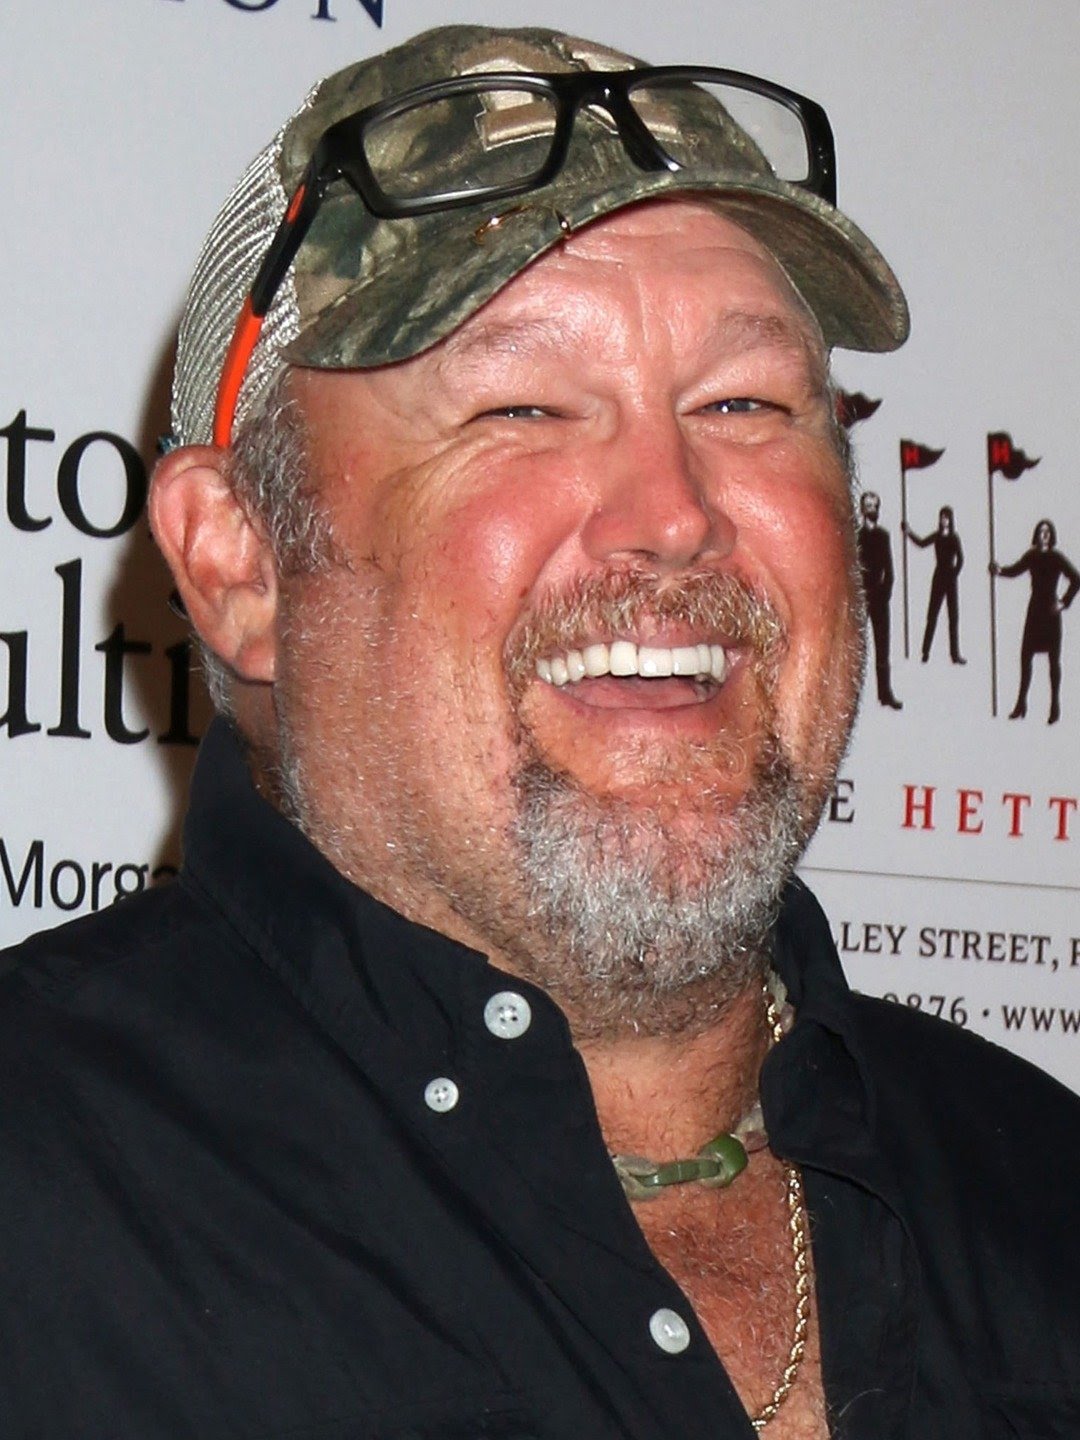 The 59-year old son of father Tom Whitney and mother  Shirley Whitney Larry the Cable Guy in 2022 photo. Larry the Cable Guy earned a  million dollar salary - leaving the net worth at 80 million in 2022